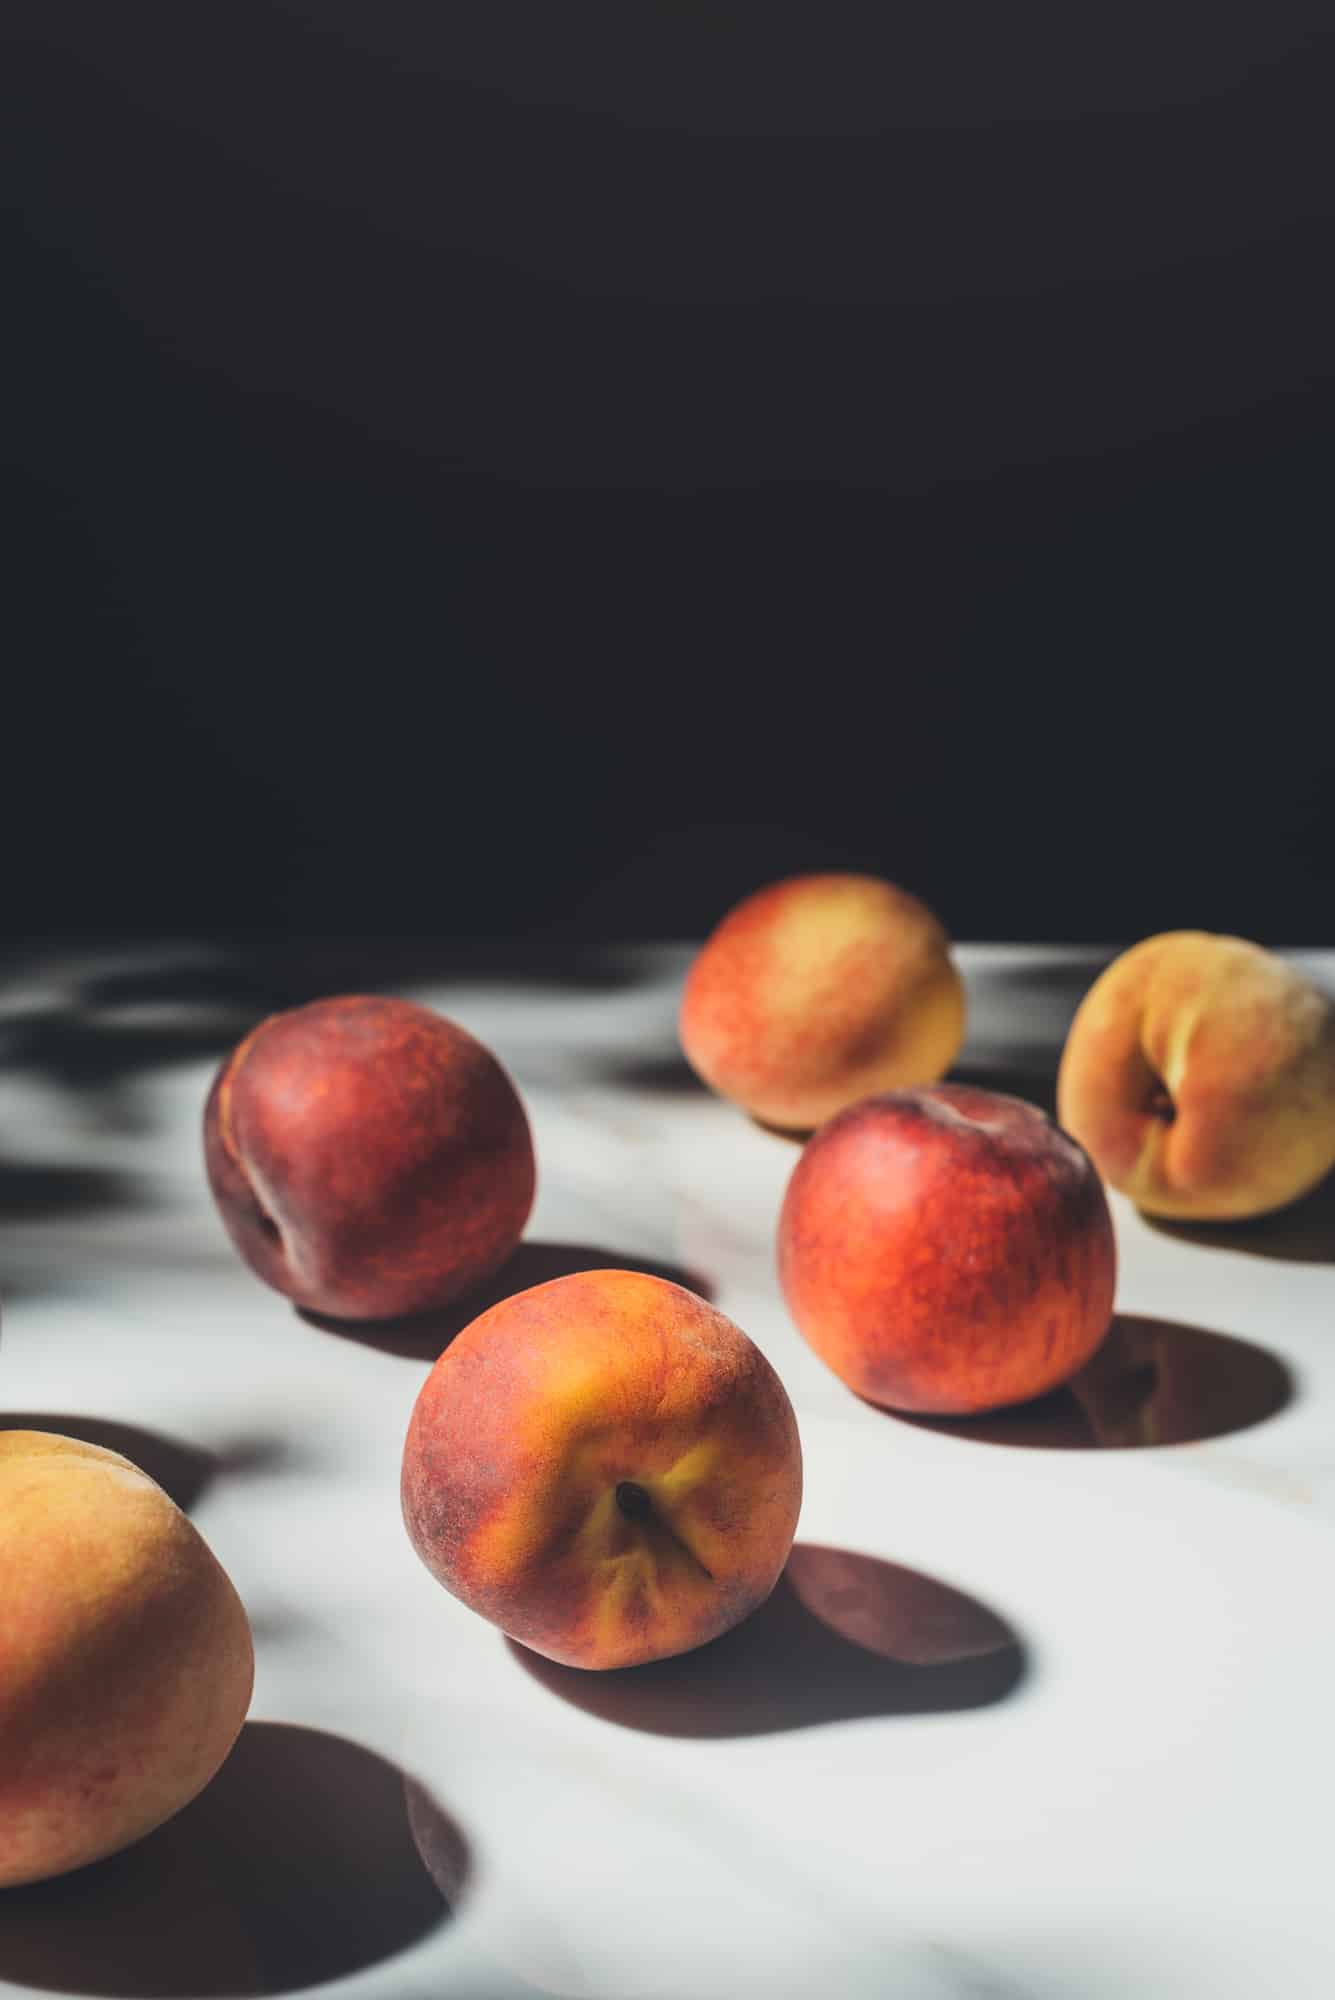 Guide on freezing peaches using a light.